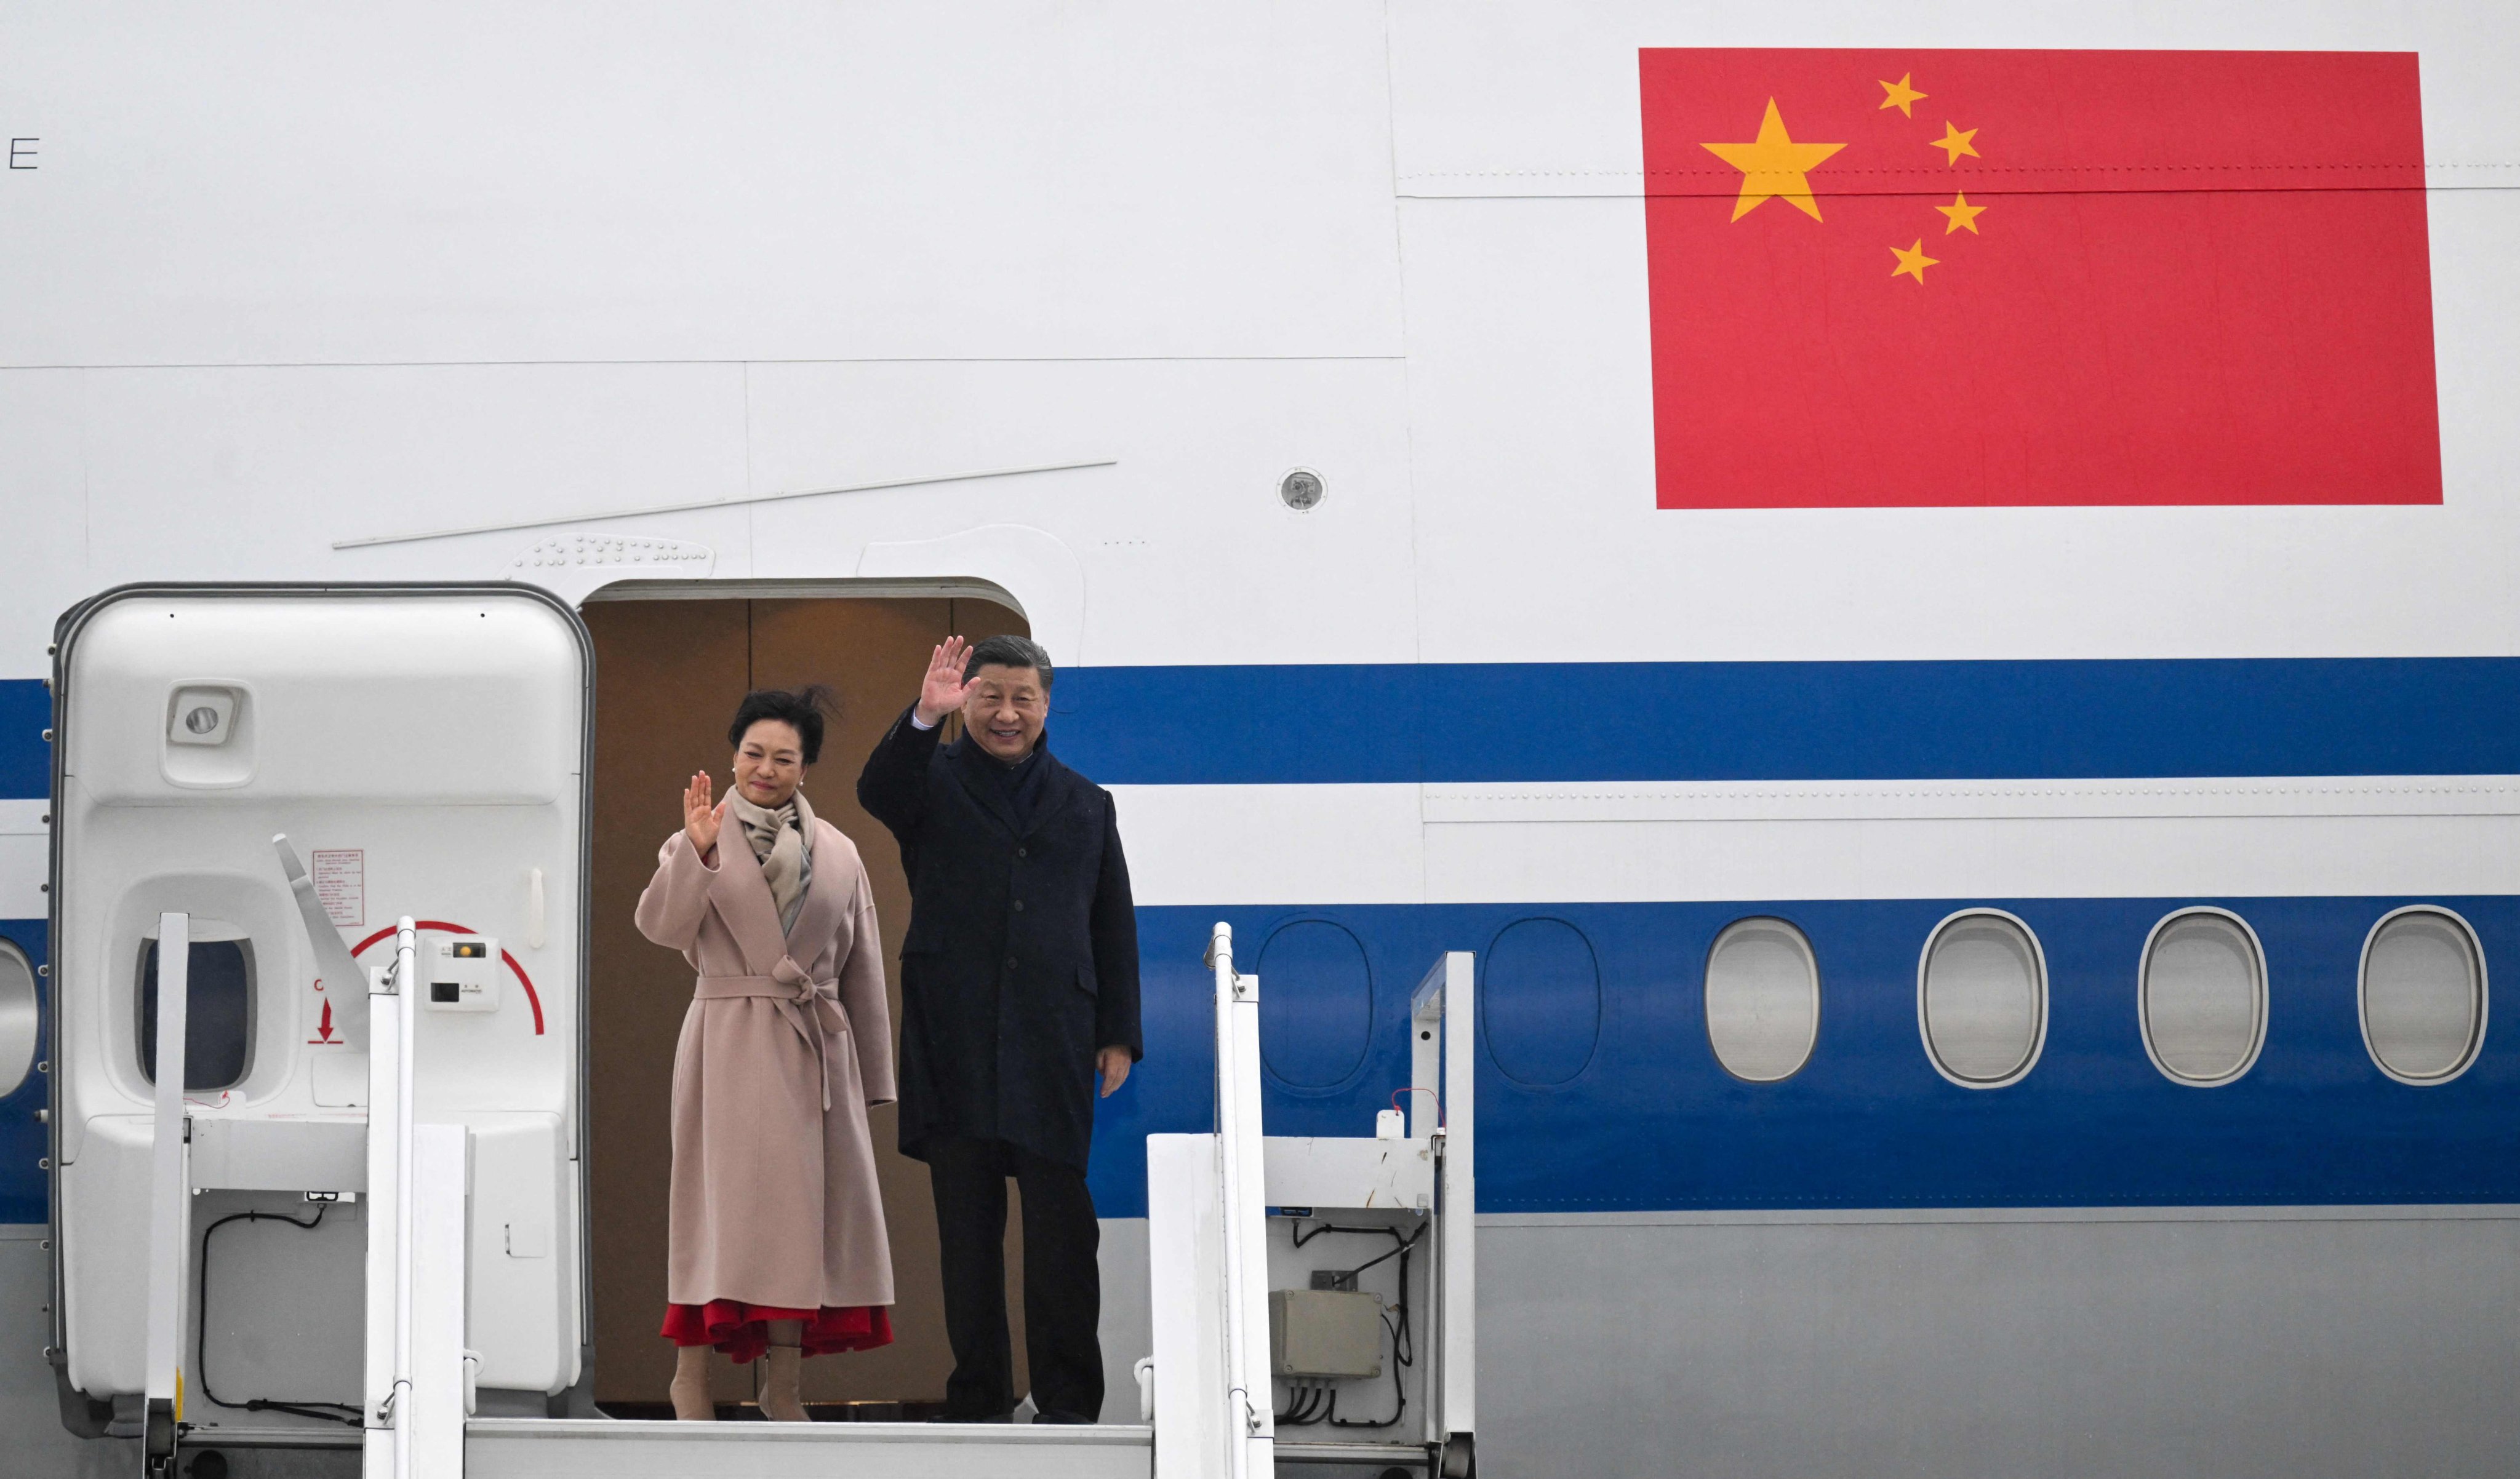 Chinese President Xi Jinping  and his wife Peng Liyuan wave from Tarbes airport in southwestern France, on Tuesday where French President Emmanuel Macron hosted Xi  in the Pyrenees mountains. Photo: AFP